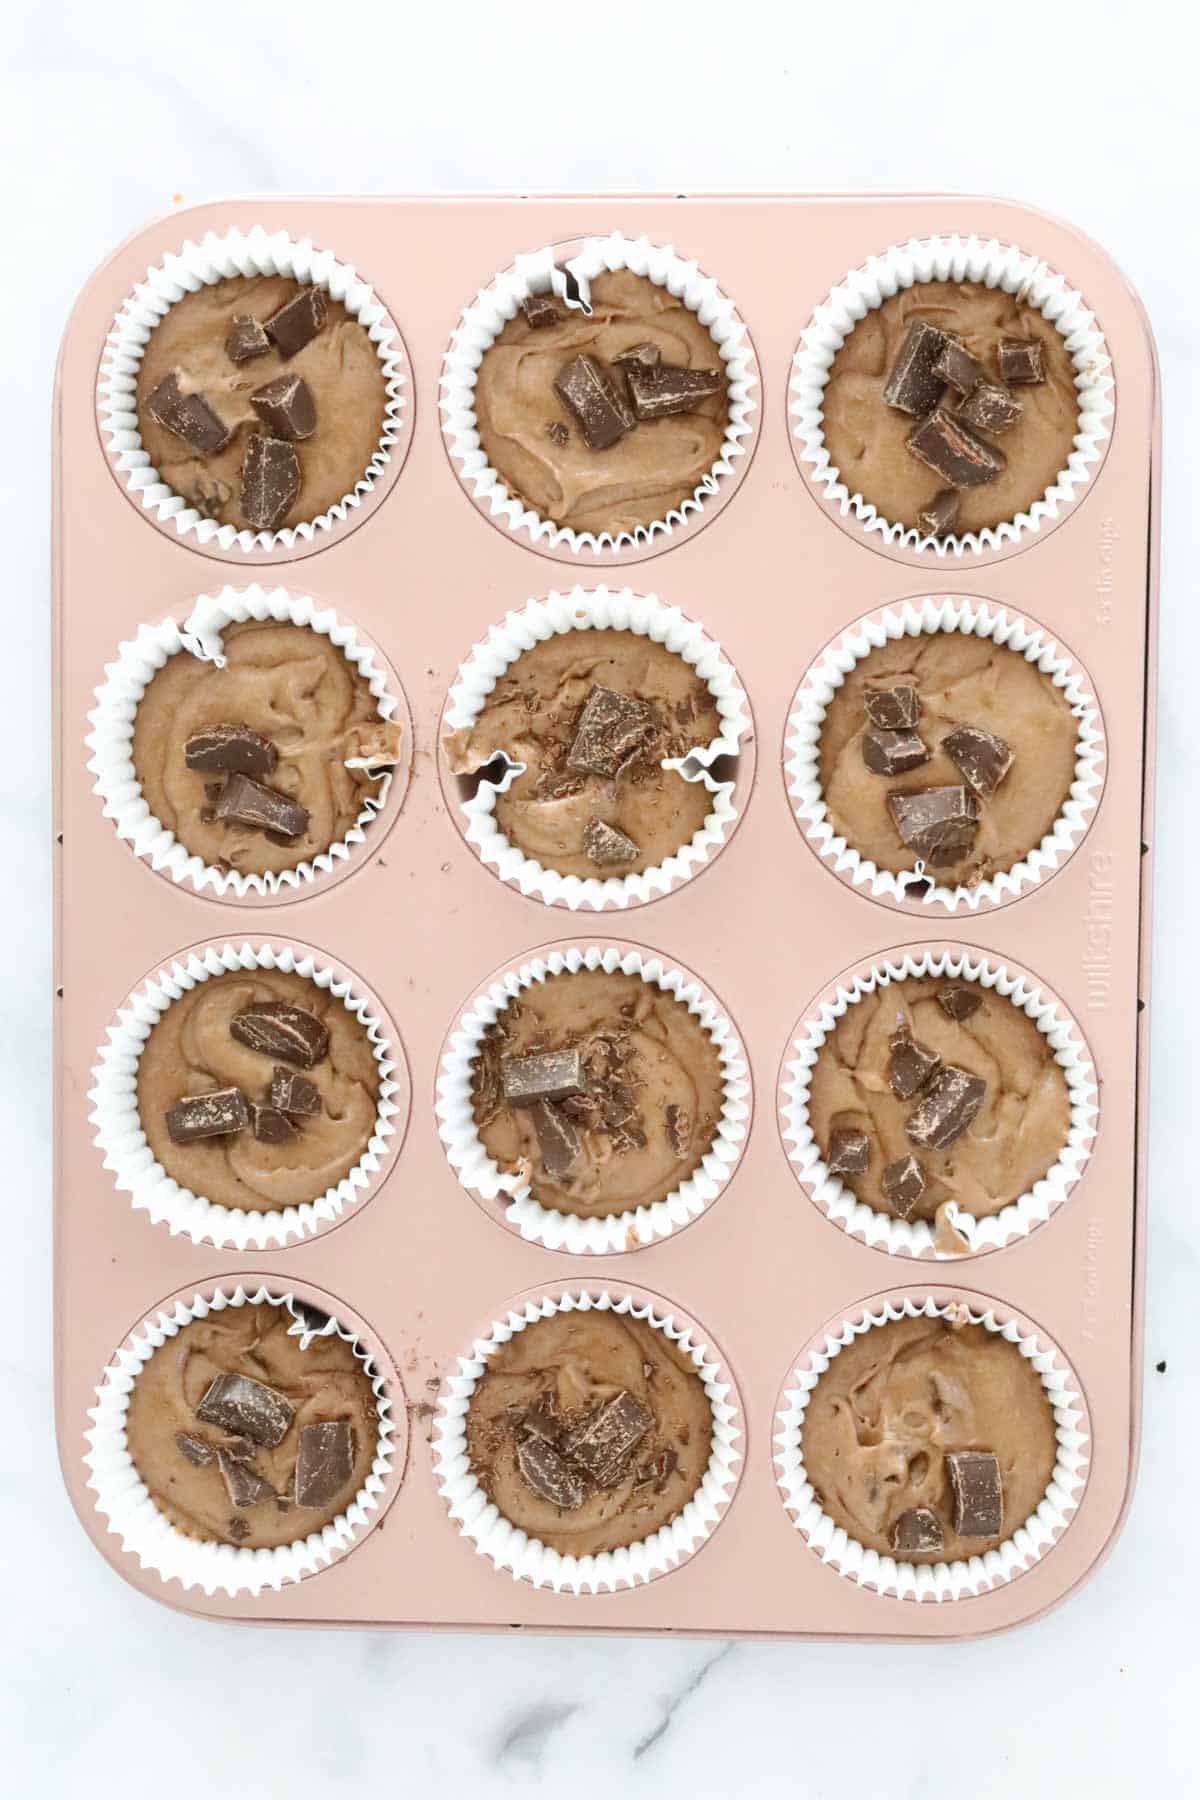 A muffin tray filled with chocolate muffin mixture.